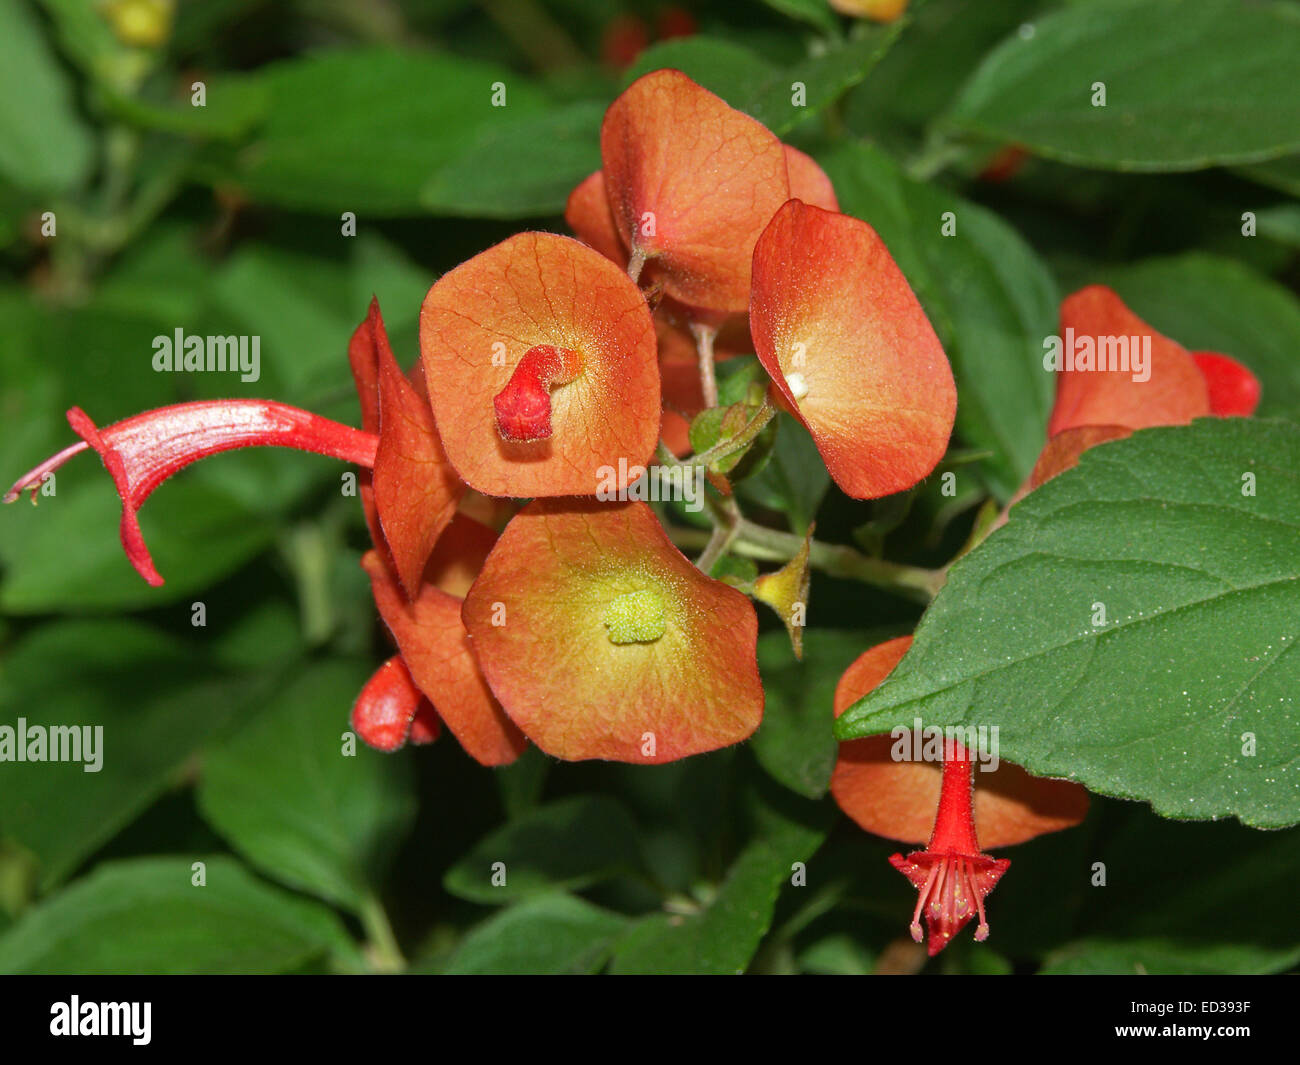 Cluster of vivid orange flowers of Holmskioldia sanguinea, Chinaman's Hat / Cup & Saucer plant  surrounded by emerald leaves Stock Photo